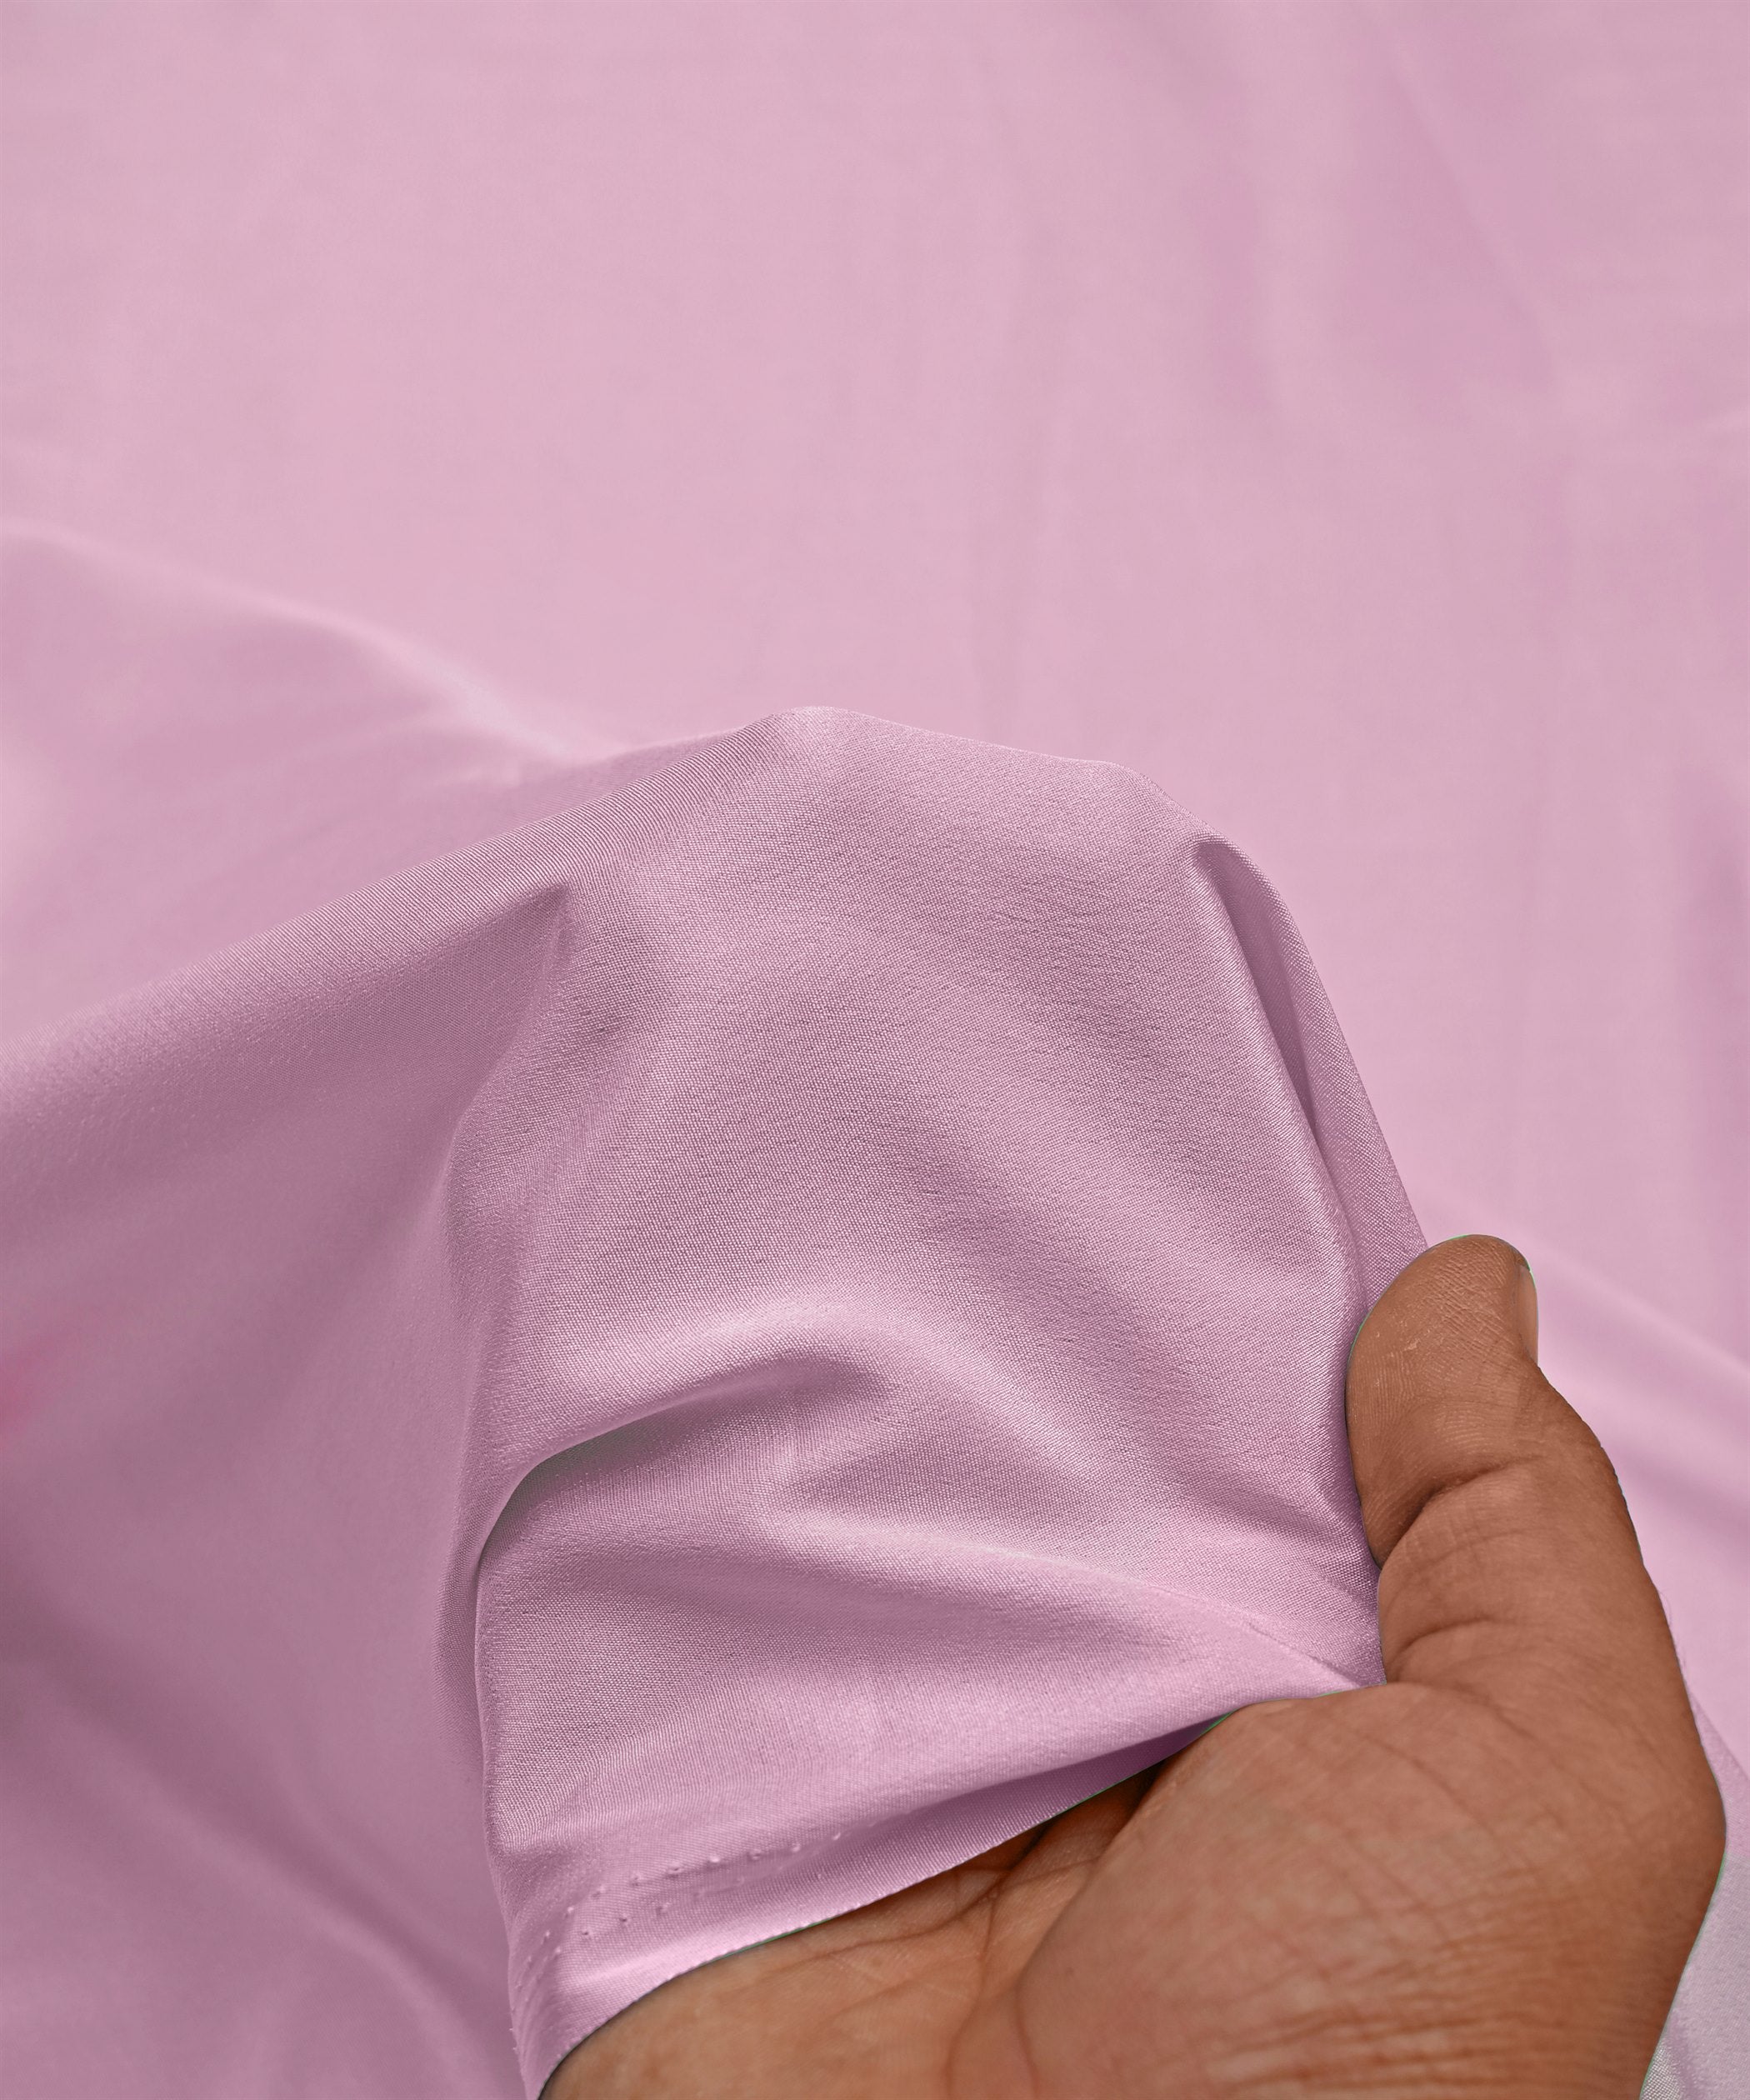 Baby Pink Plain Dyed Crepe Fabric